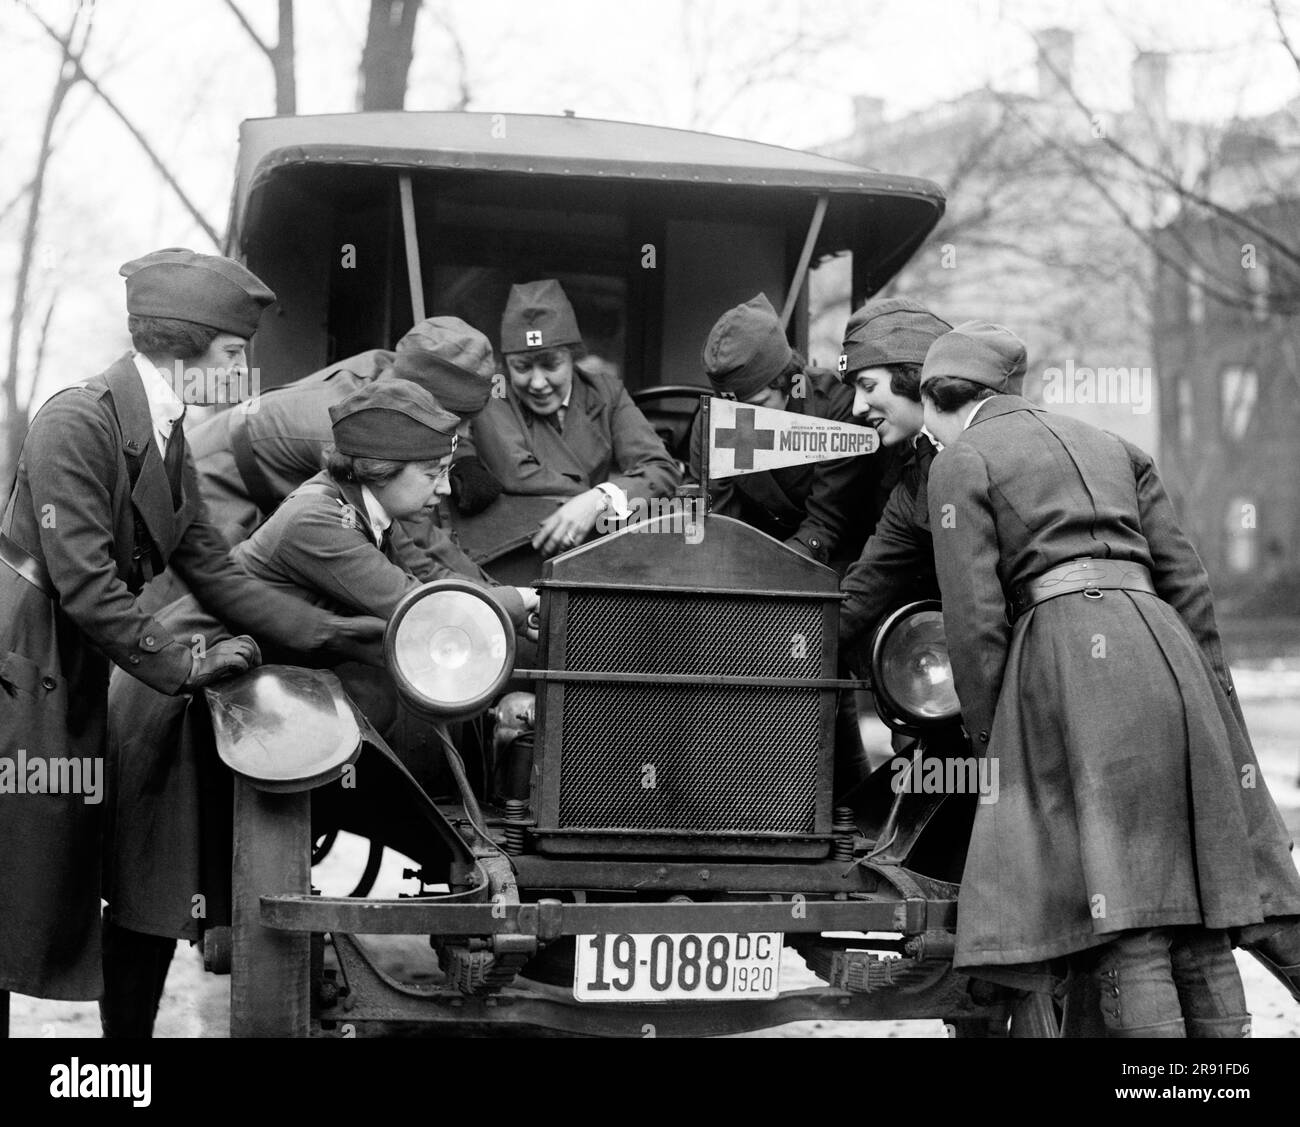 Washington, D.C.:  1920 With the flu on the increase, ambulance drivers are in demand for the American Red Cross, so here a class is being instructed in the mysteries of an ambulance motor. Stock Photo